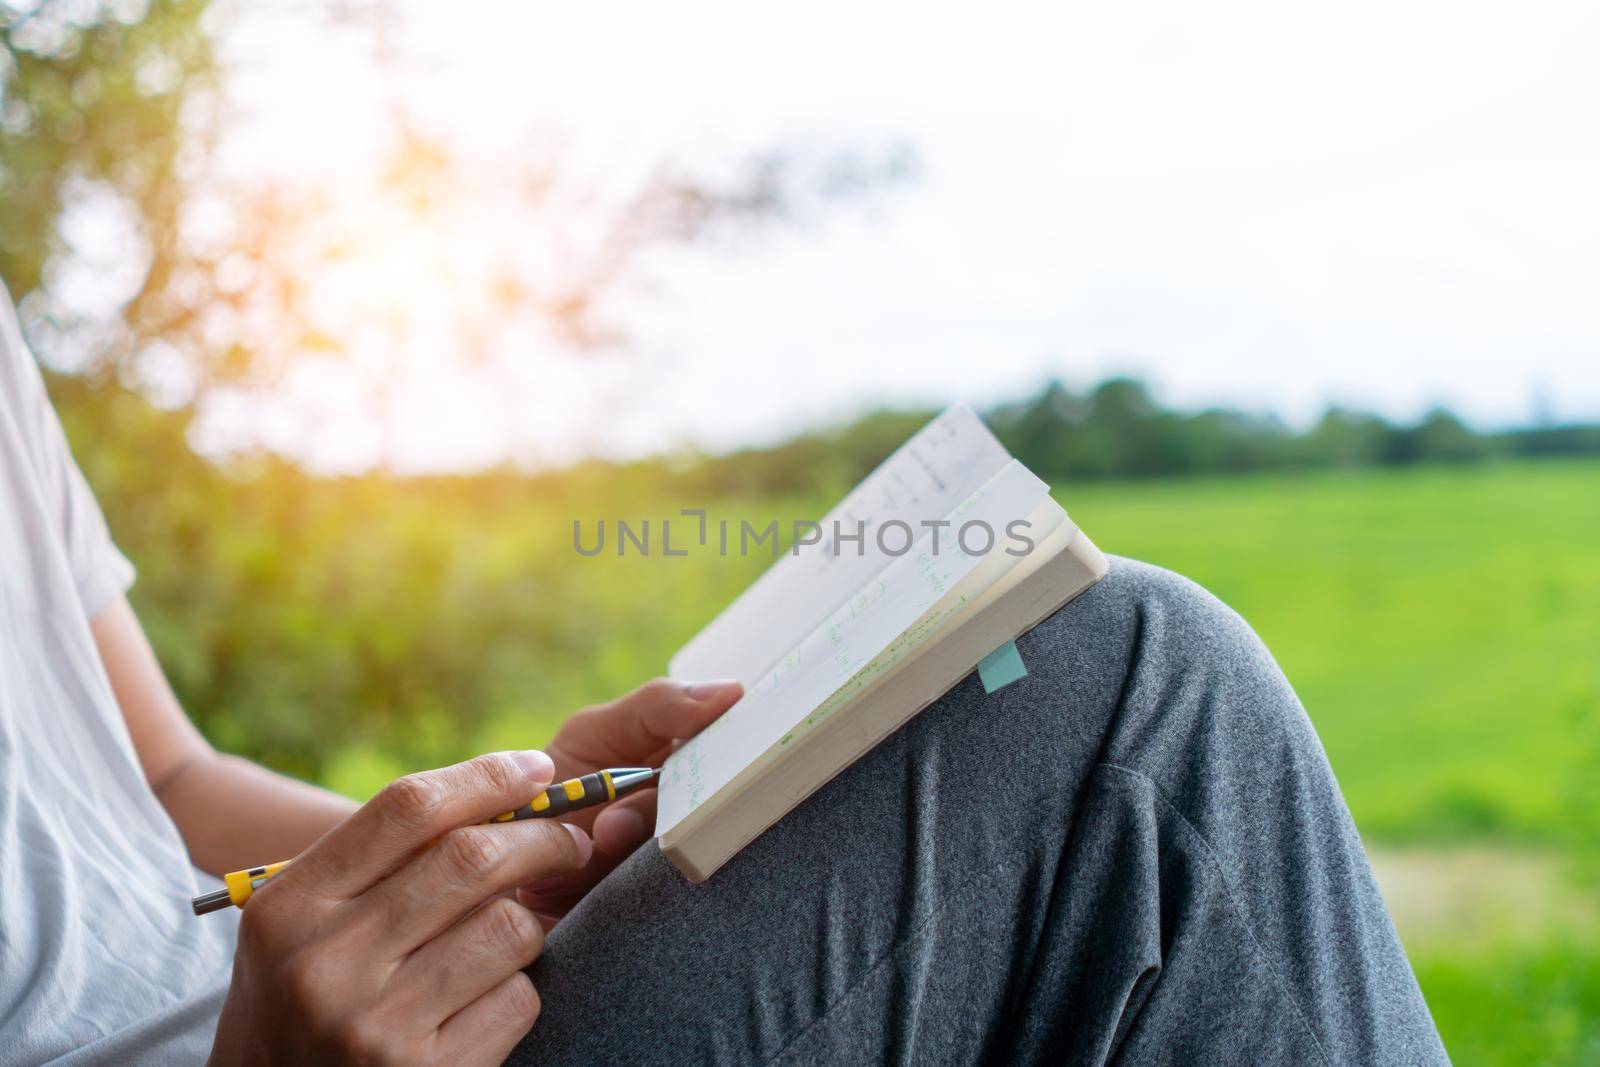 In a public park, a man is handwriting in a small white memo pad to make a note of something he doesn't want to forget or to make a to-do list for the future. by Suwant